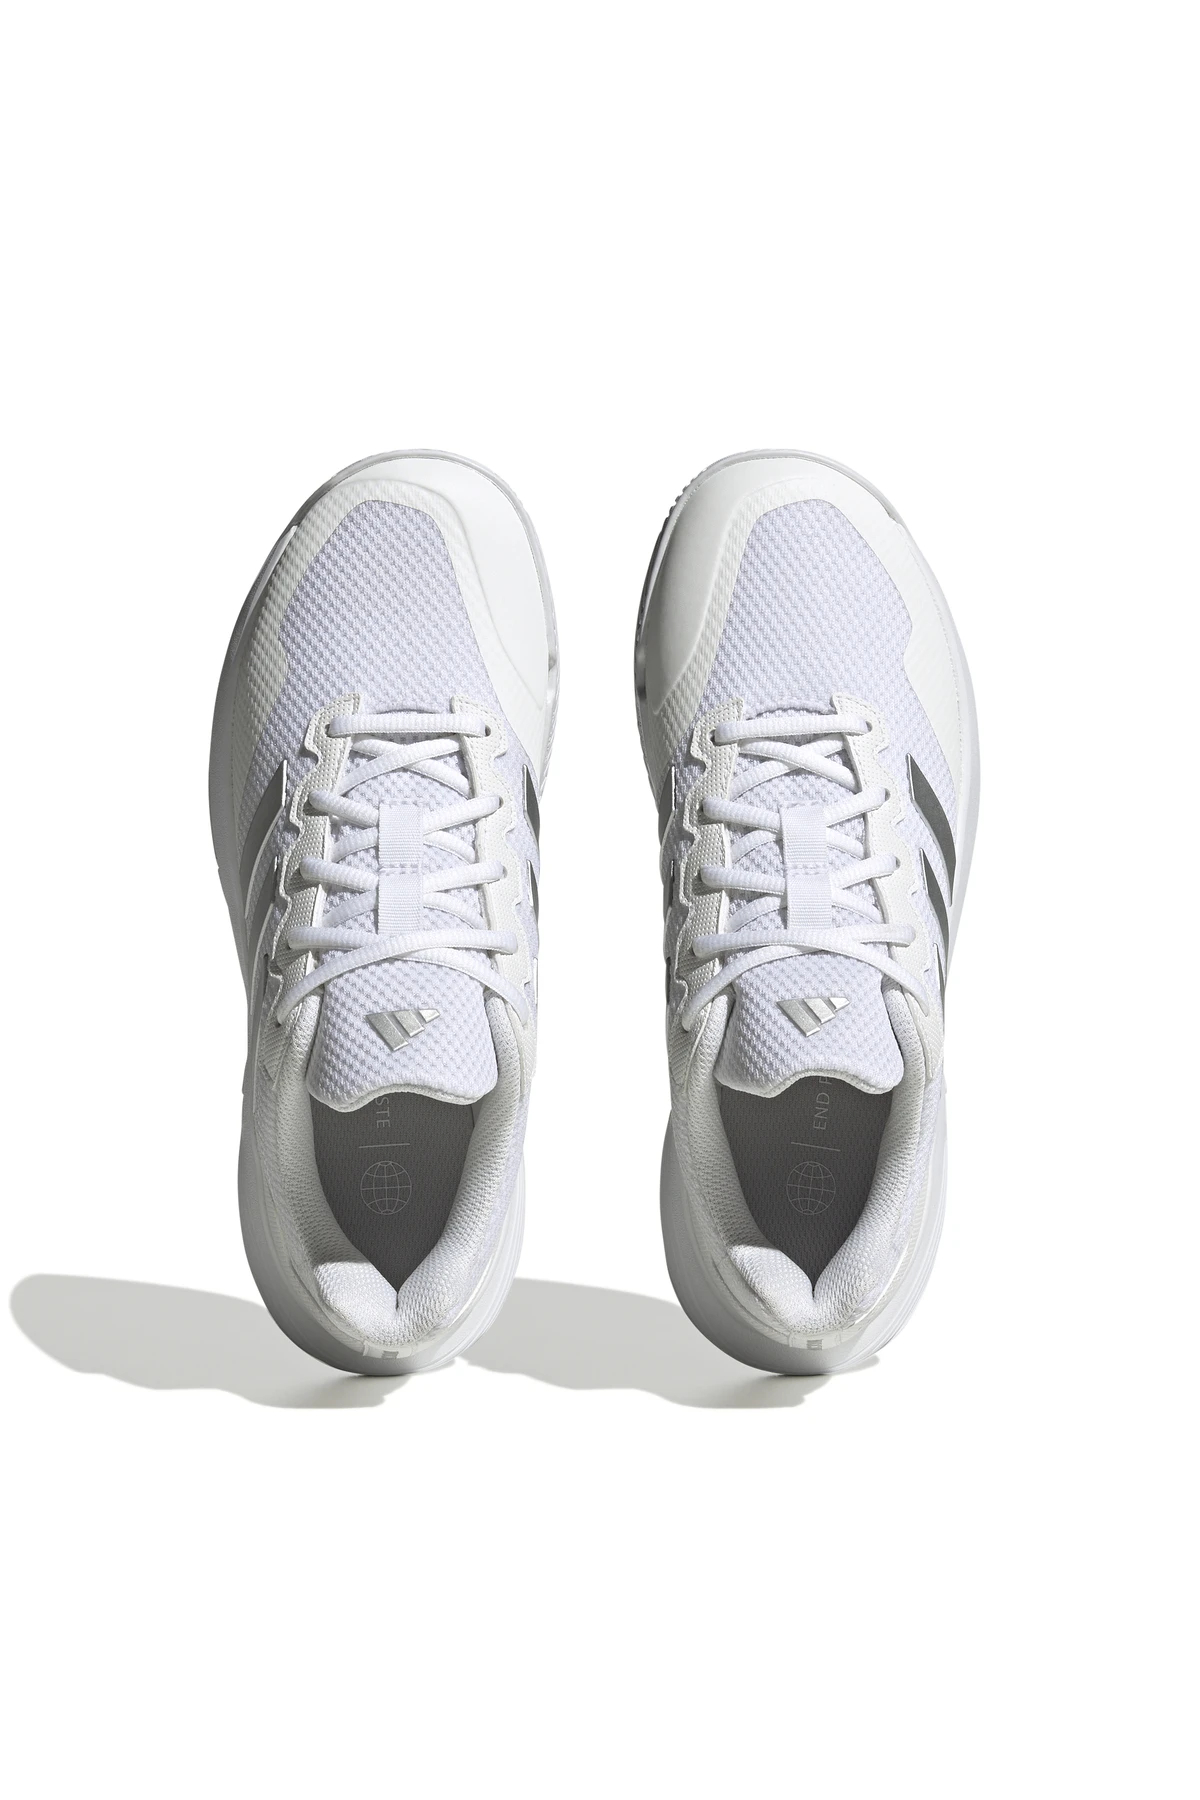 The Allure of Adidas Women’s Tennis Shoes插图4